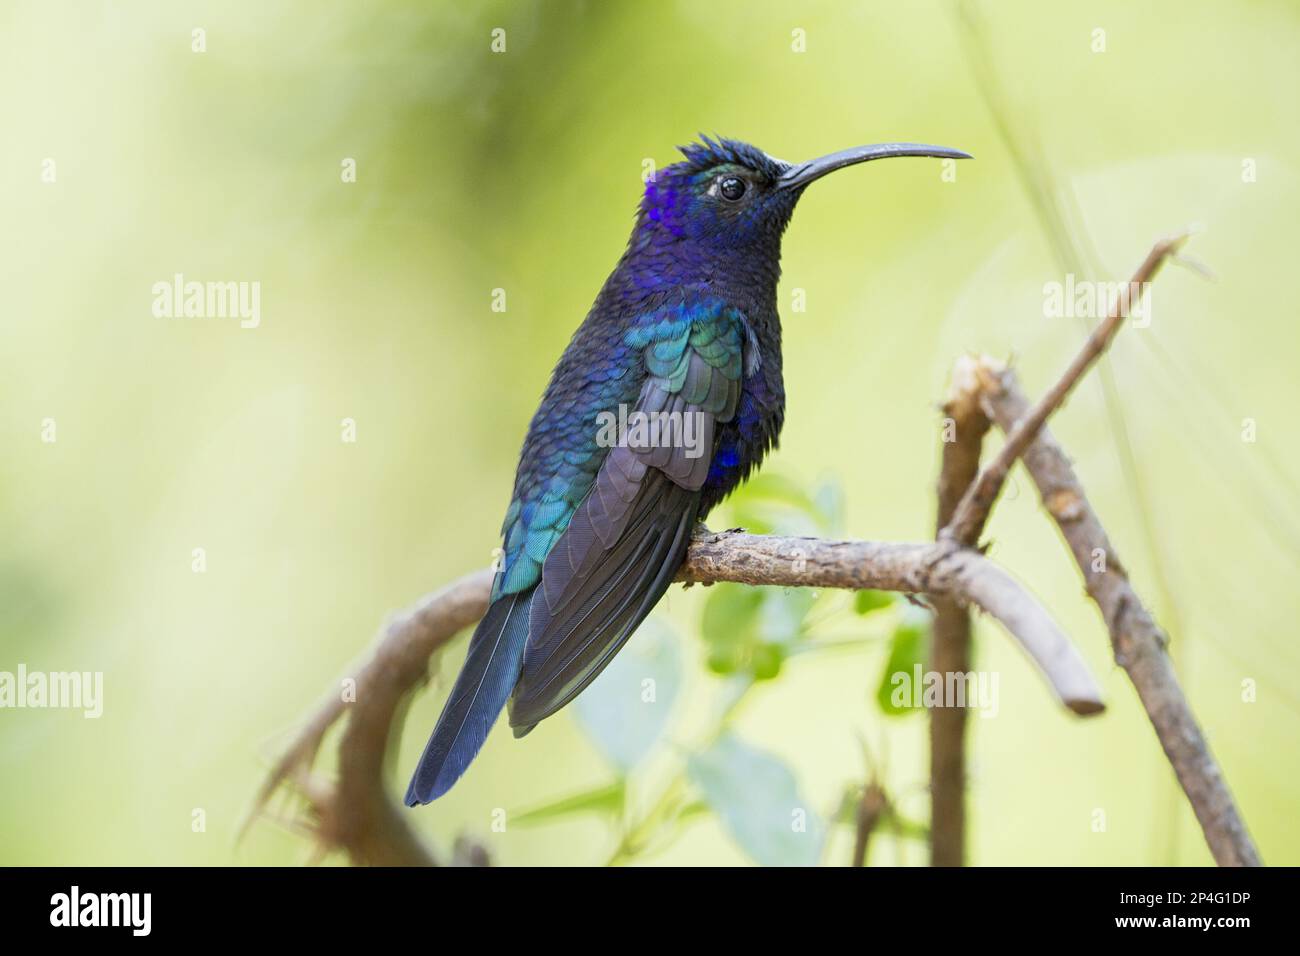 Violet Sabrewing (Campylopterus hemileucurus) adult male, perched on twig, Costa Rica Stock Photo